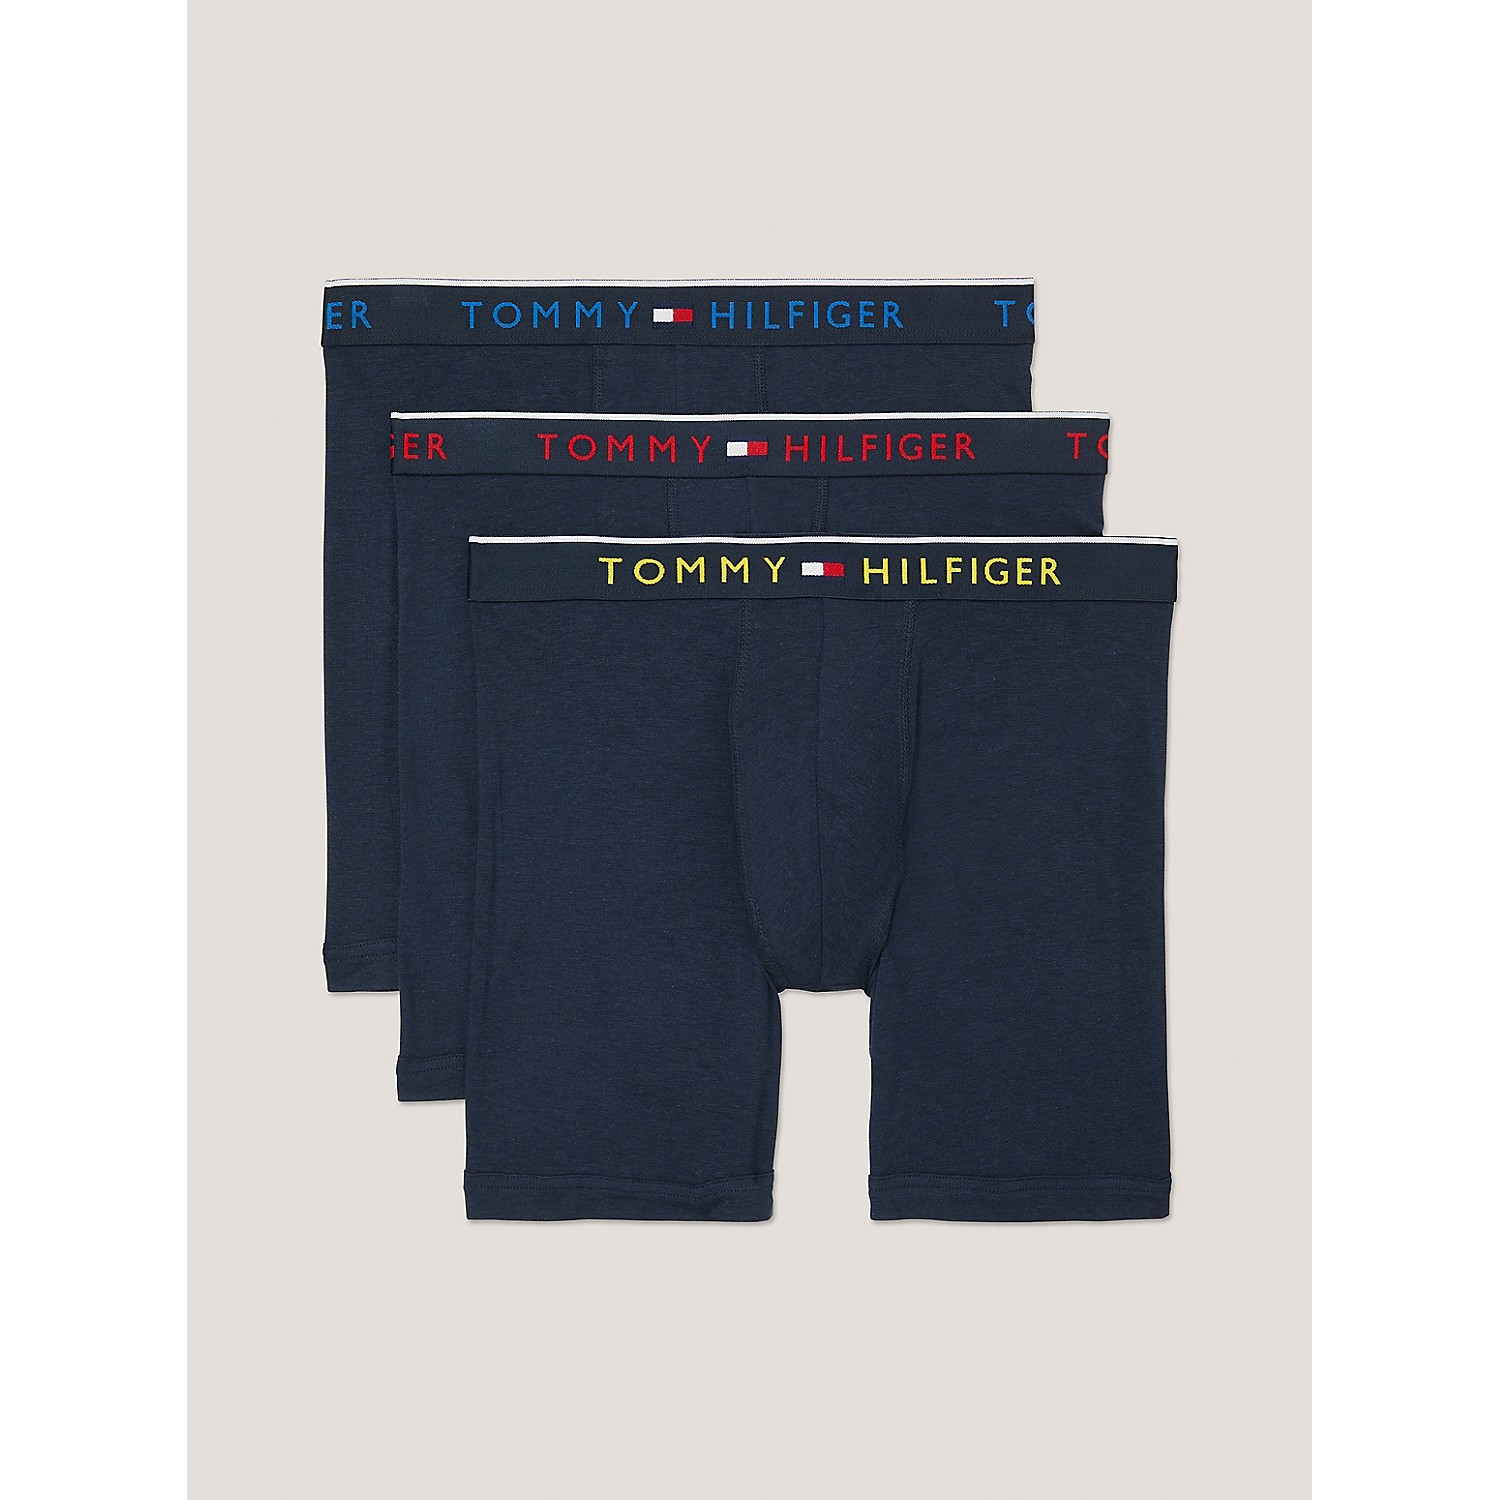 TOMMY HILFIGER Essential Luxe Stretch Boxer Brief 3-Pack